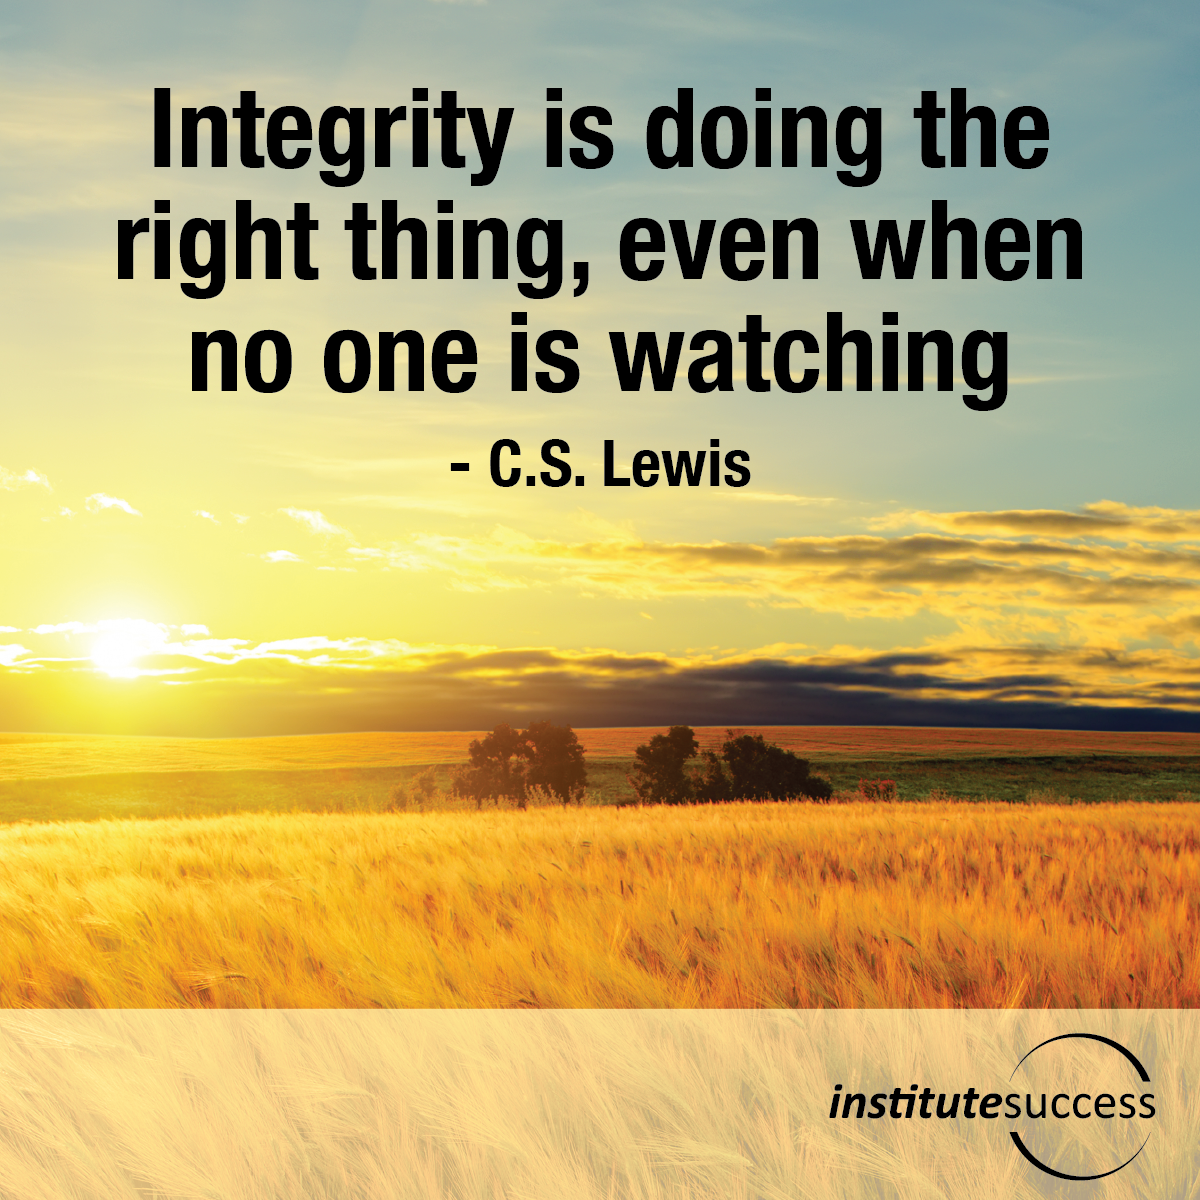 2018 04 09 Quote Integrity Is Doing The Right Thing 1200x1200 